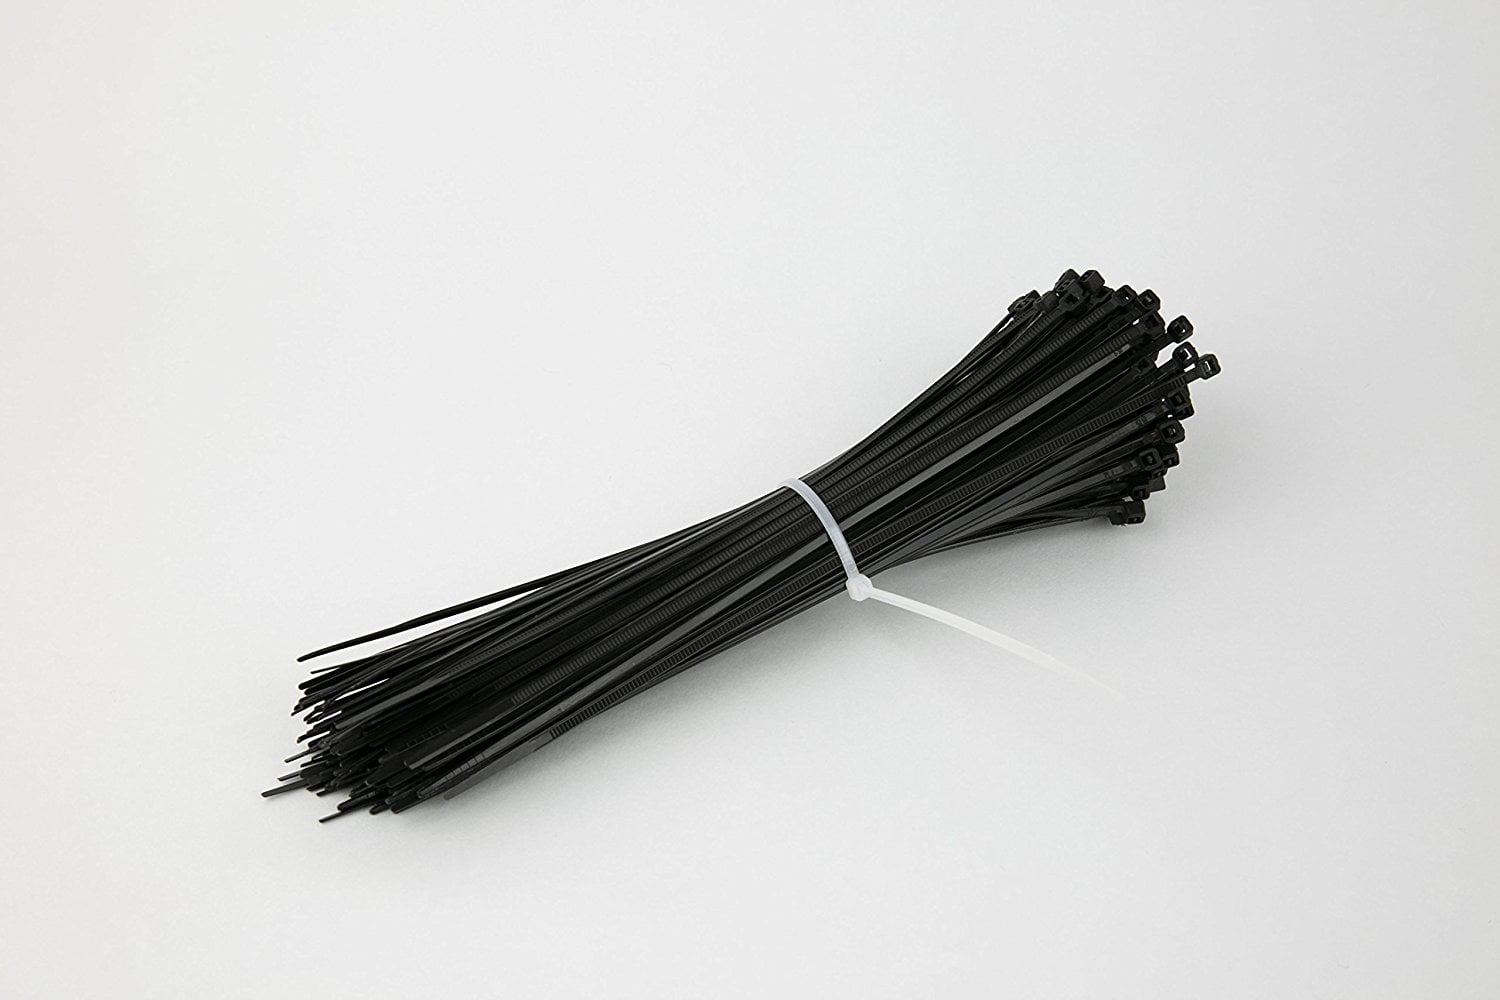 Details about   100 Cable Zip Ties 12 Inch Long Cable Ties Super Strong Nylon Cord Wrap Black 